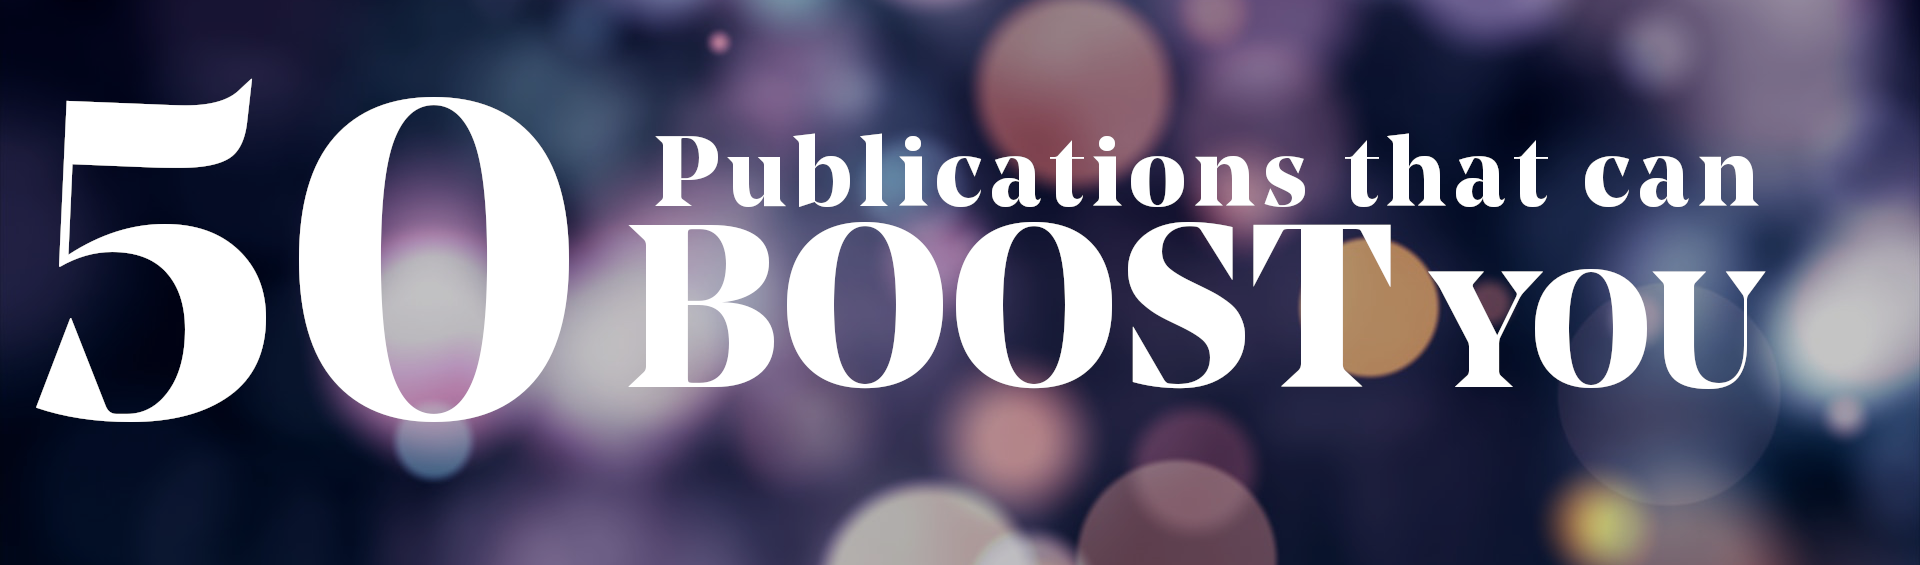 These 70+ Publications Can Boost You!, by Robin Wilding 💎